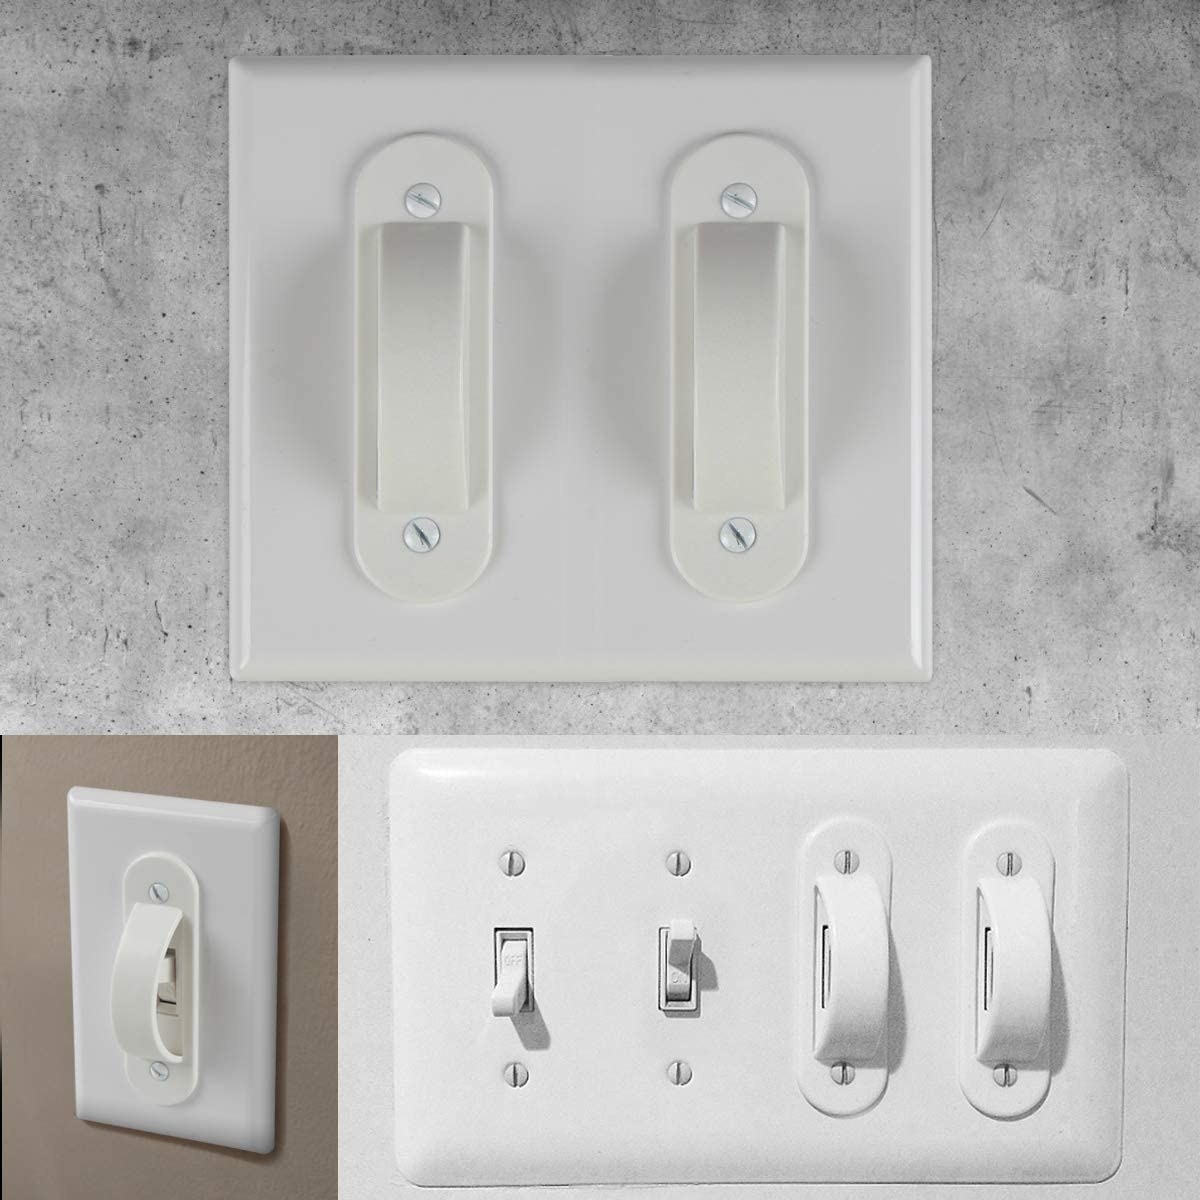 Several light switches with light switch covers on them